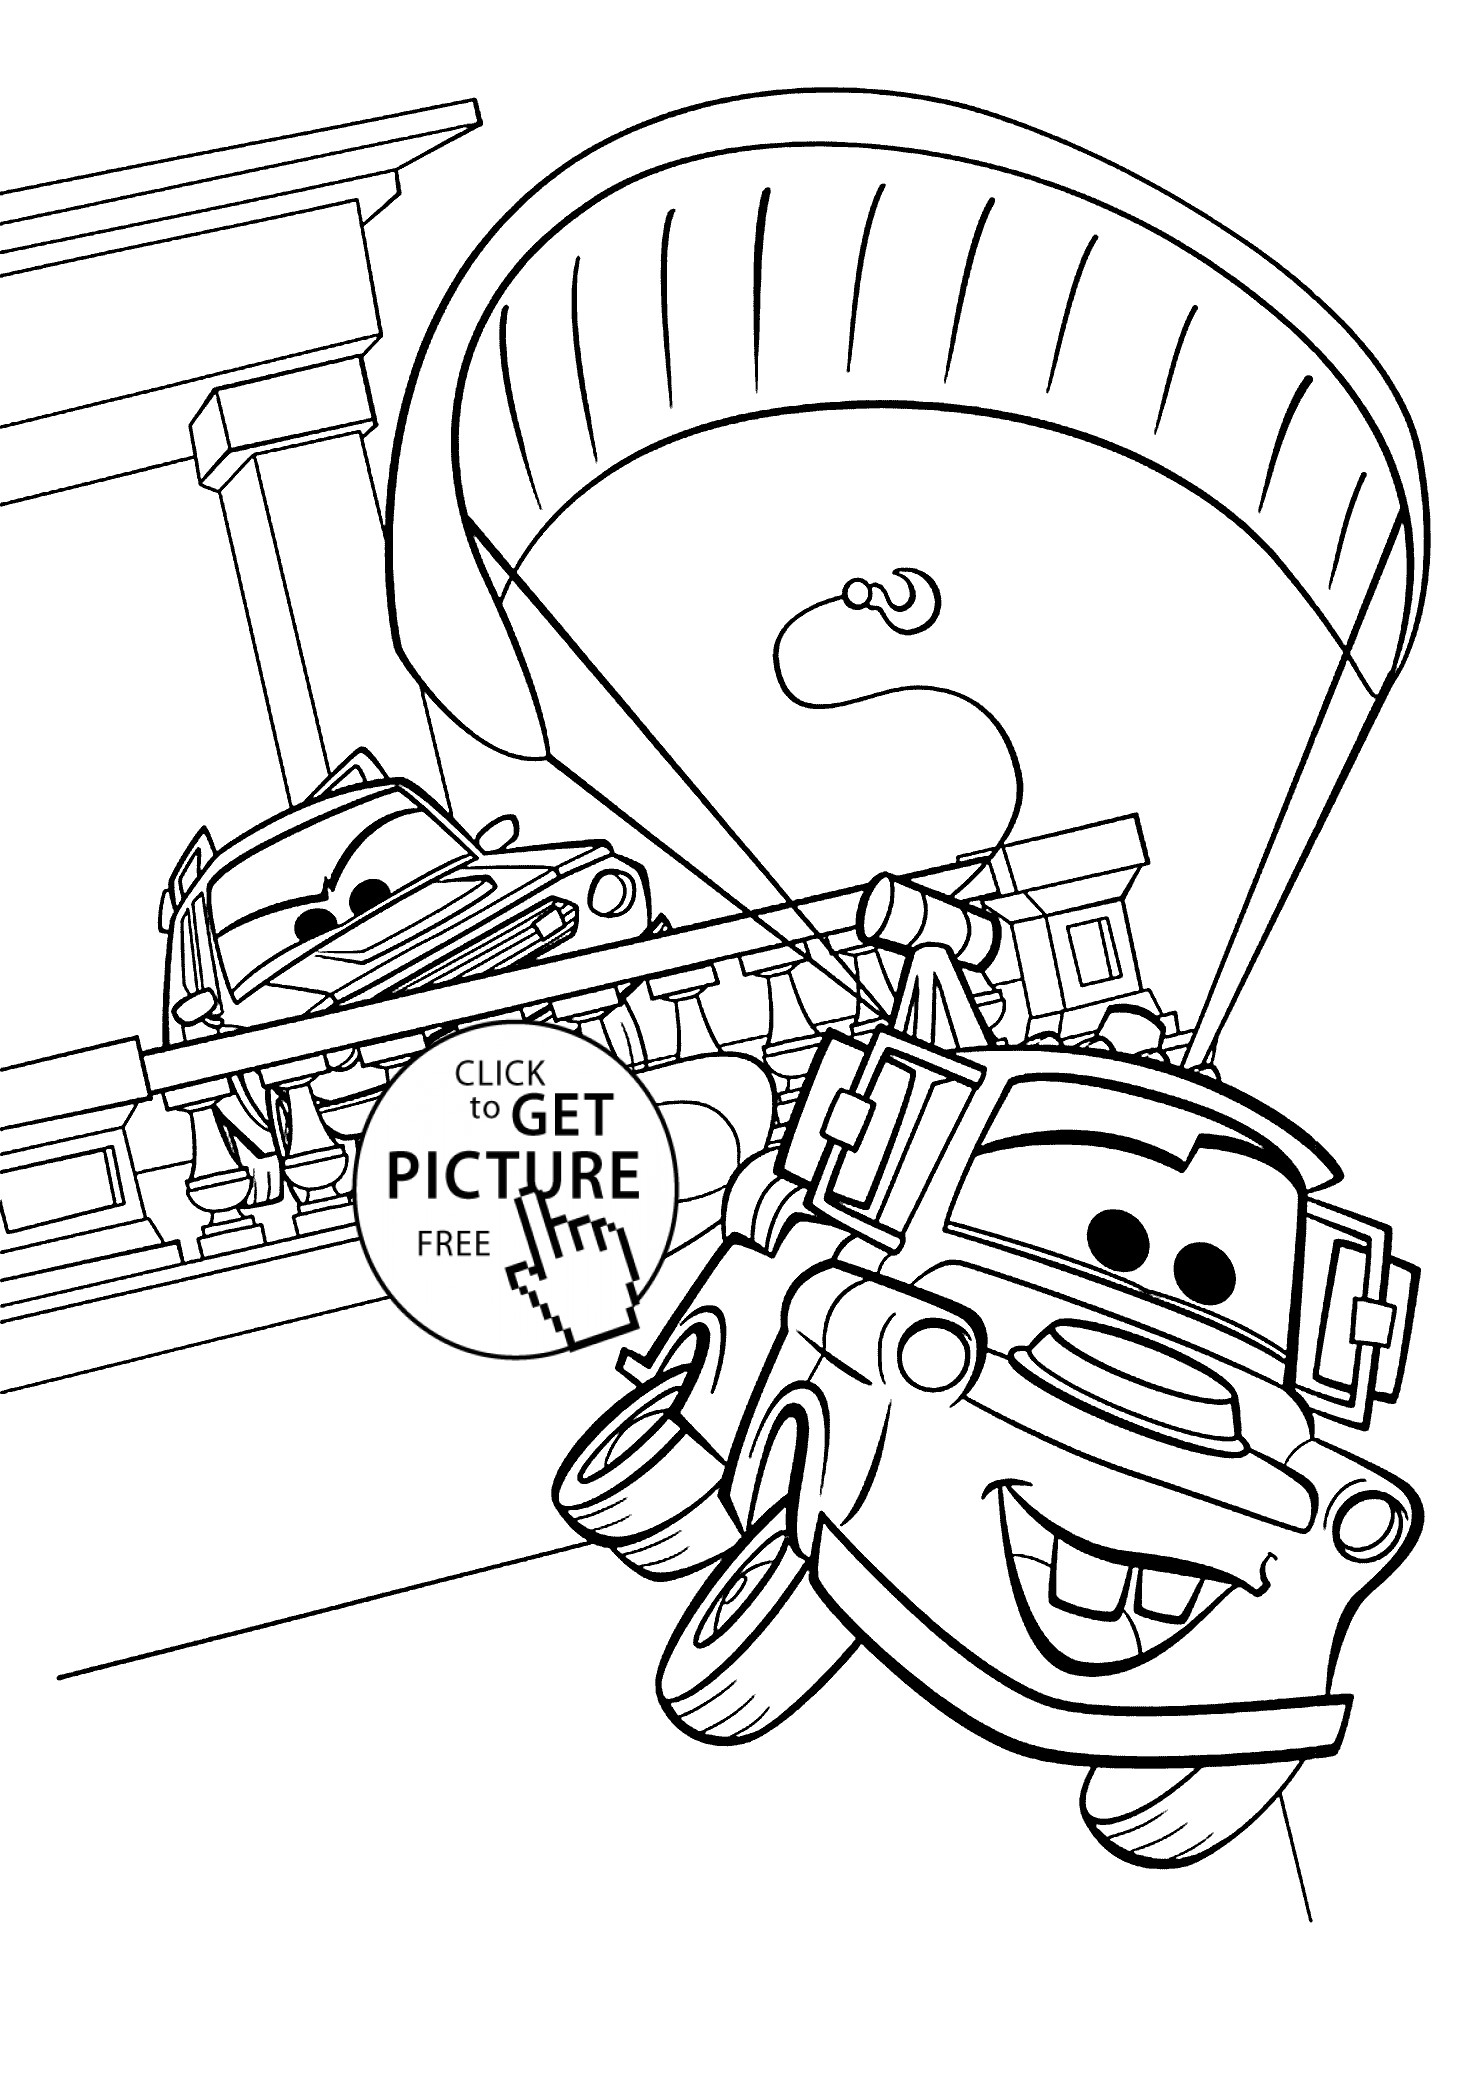 Cars 2 Free Coloring Pages
 Mater Cars 2 coloring pages for kids printable free